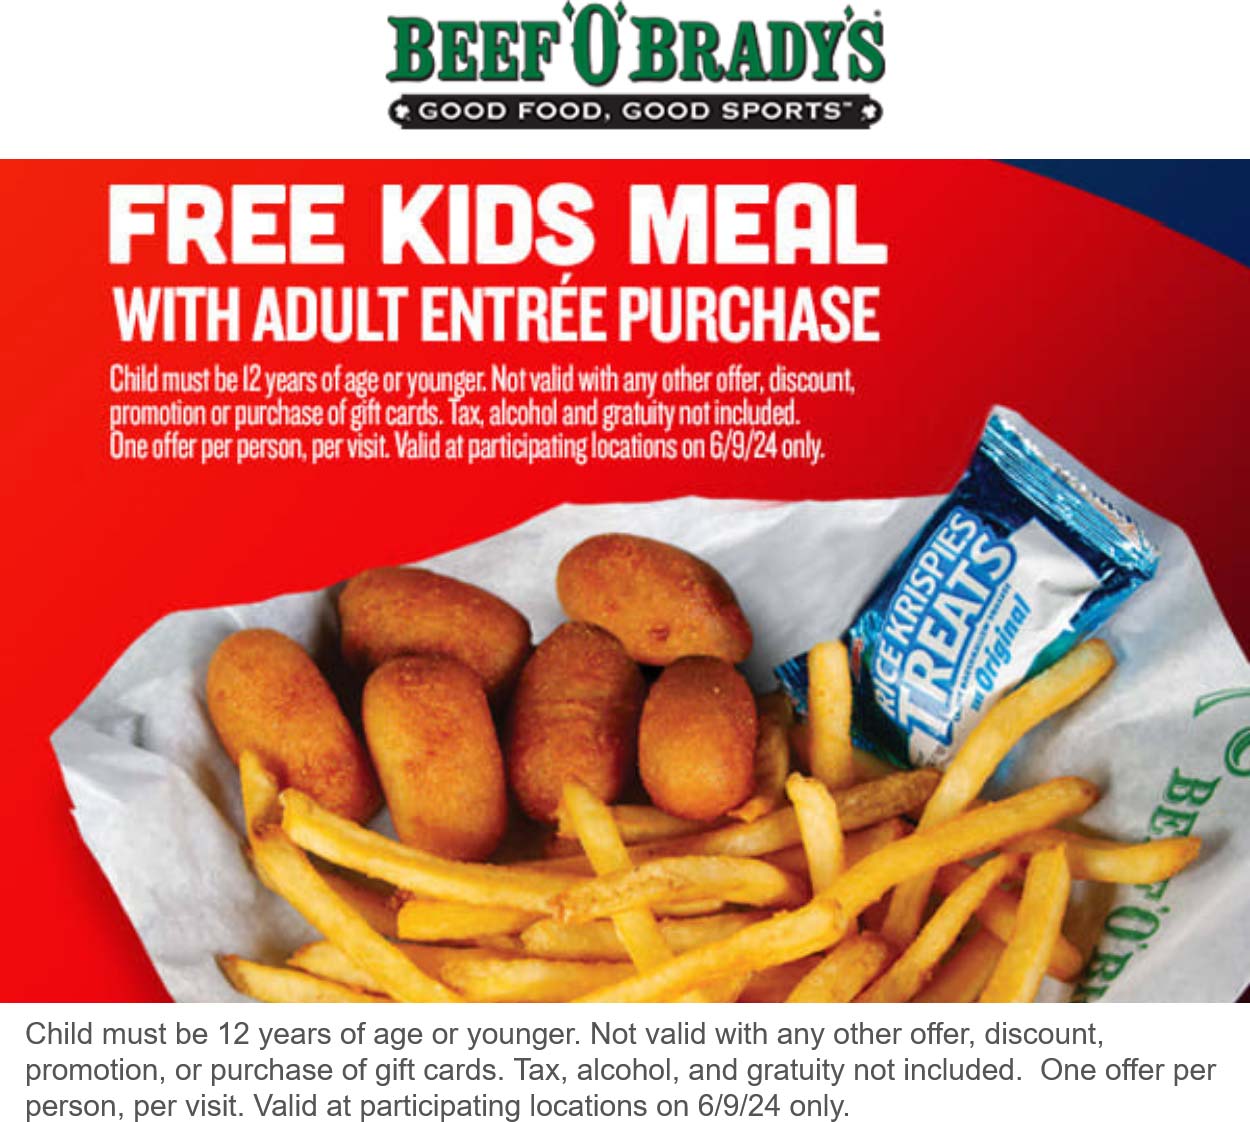 Beef OBradys restaurants Coupon  Free kids meal with your entree Sunday at Beef OBradys #beefobradys 